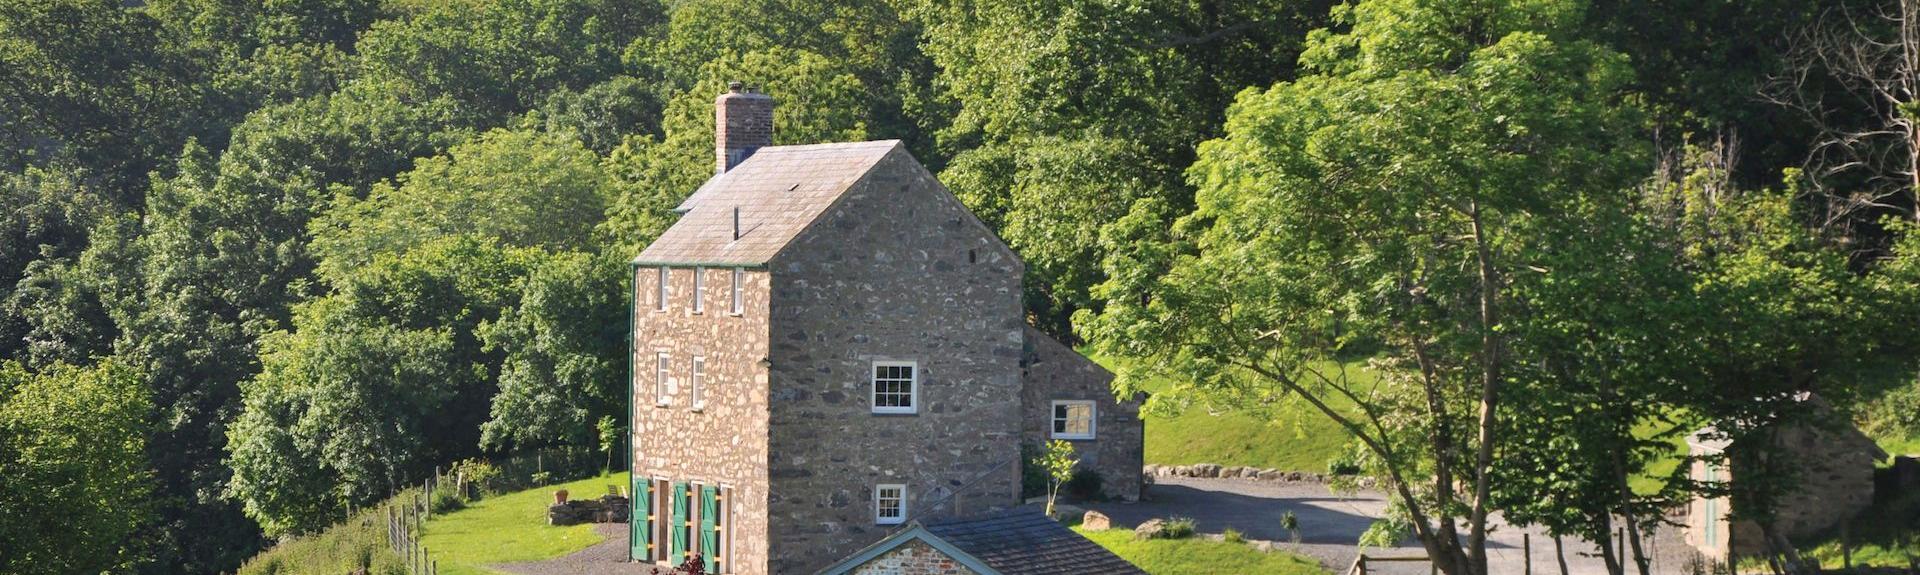 View Holiday Cottages in Snowdonia